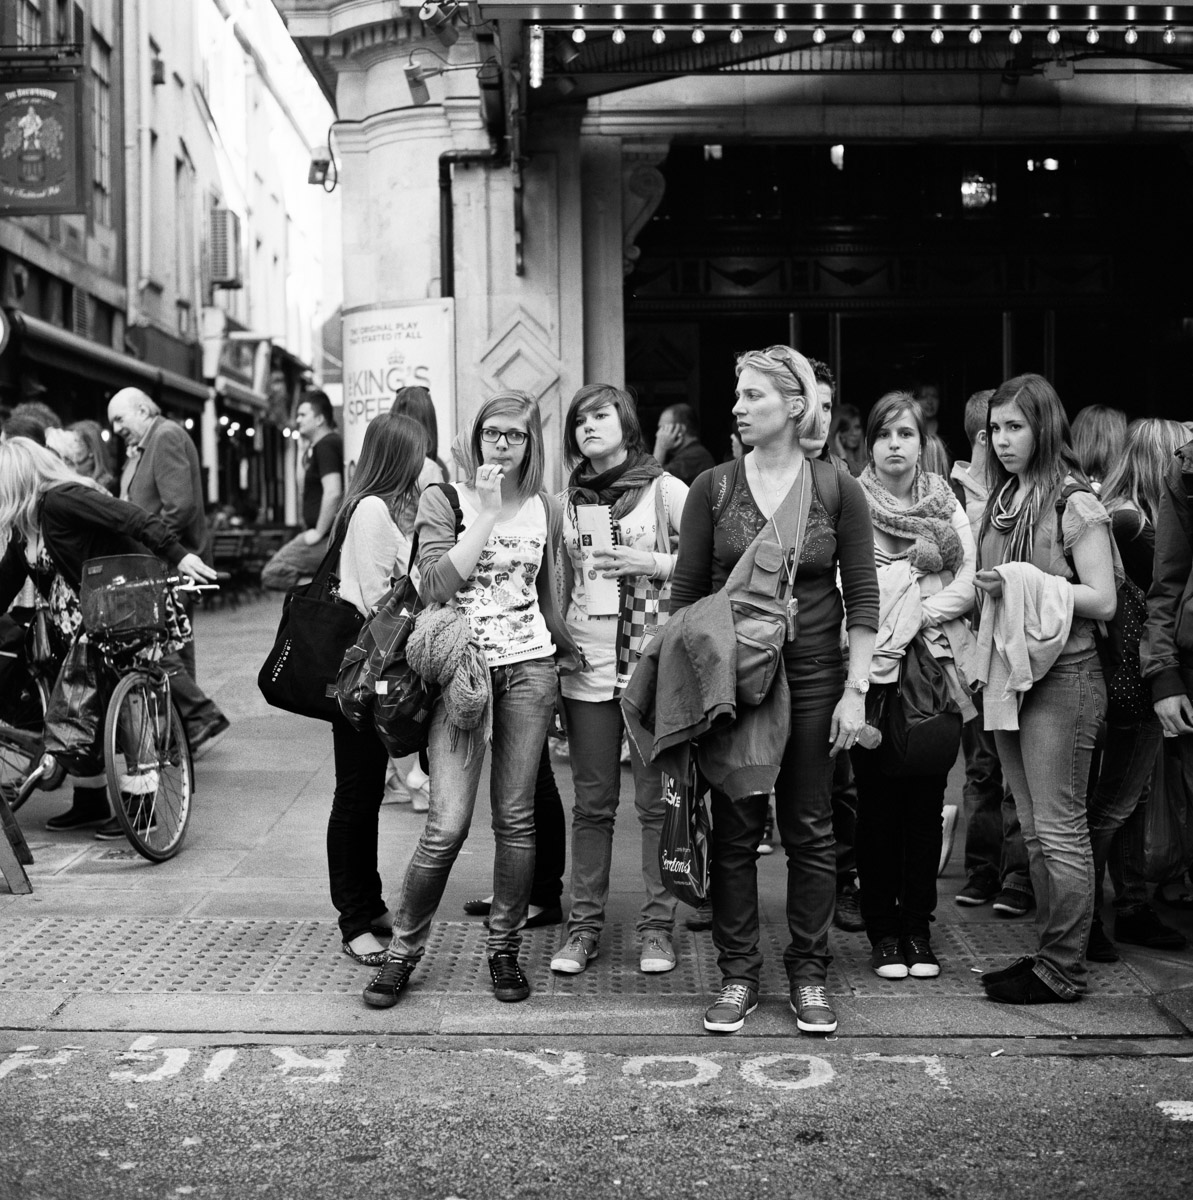 Street Photography London 120 Film  - Waiting for a traffic light